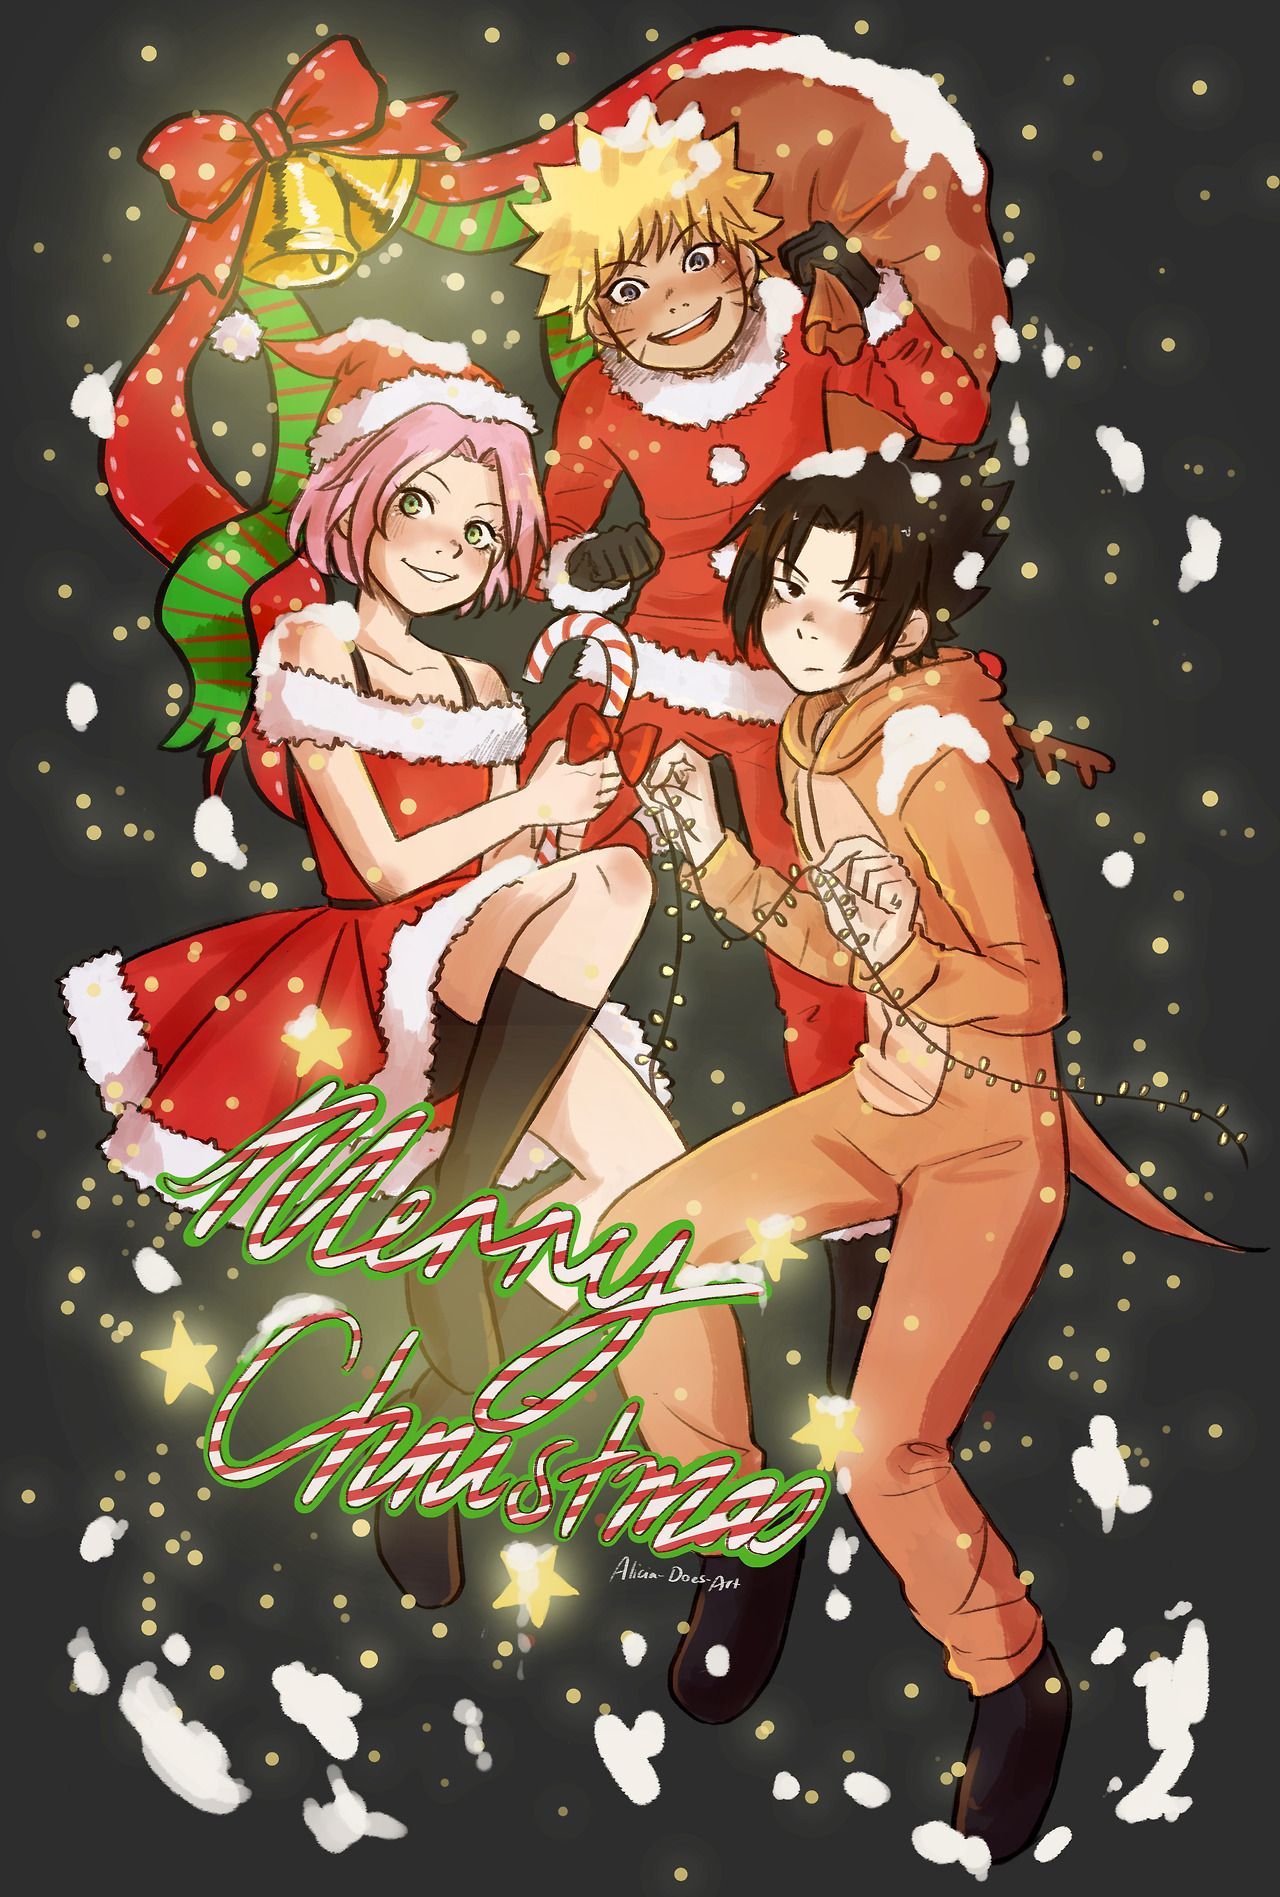 Alicia Does Art: “ I Can't Believe Christmas Is Tomorrow WoaH But Yeah Here's Team 7 But Merry Christmas To All Who Celebrat. Anime Christmas, Anime, Friend Anime